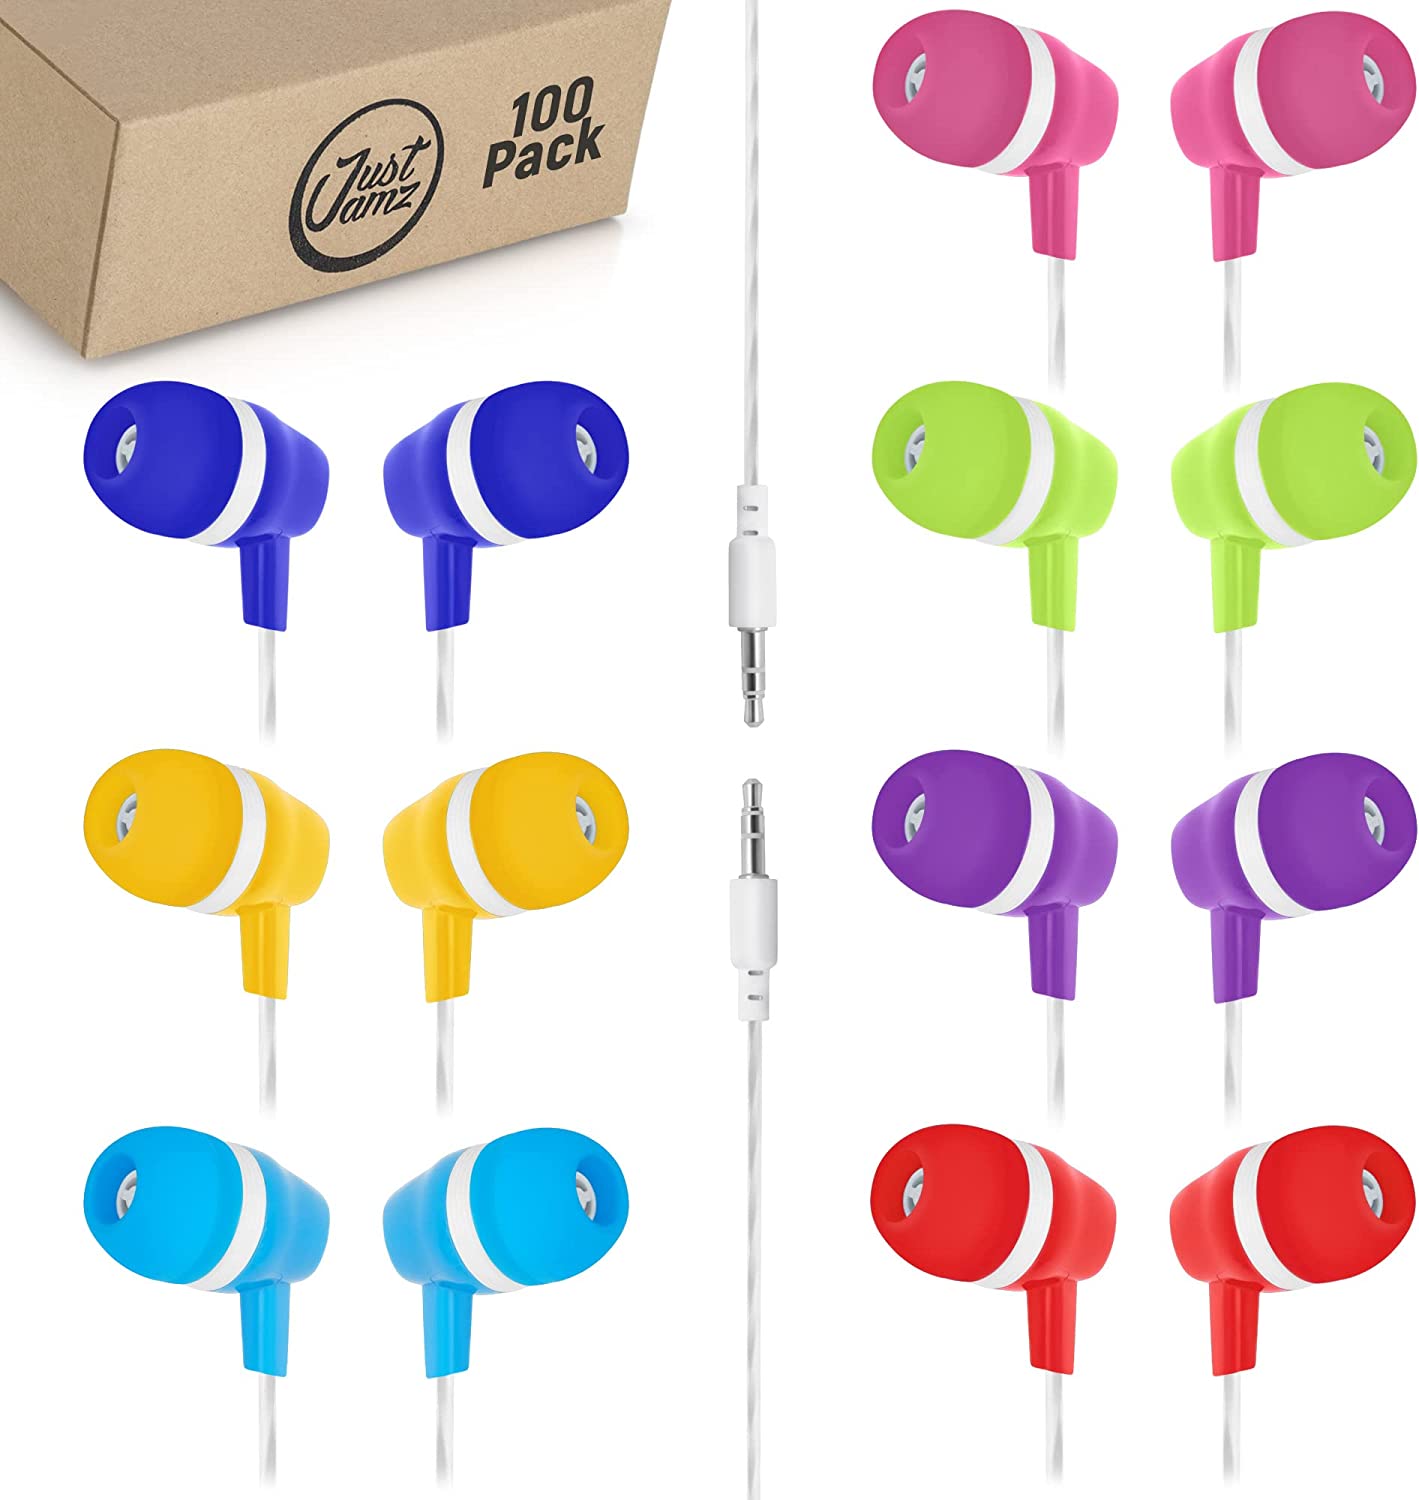 100 Pack of JustJamz Bubbles, Colorful in-Ear Earbuds, Assorted Colors (Europe)